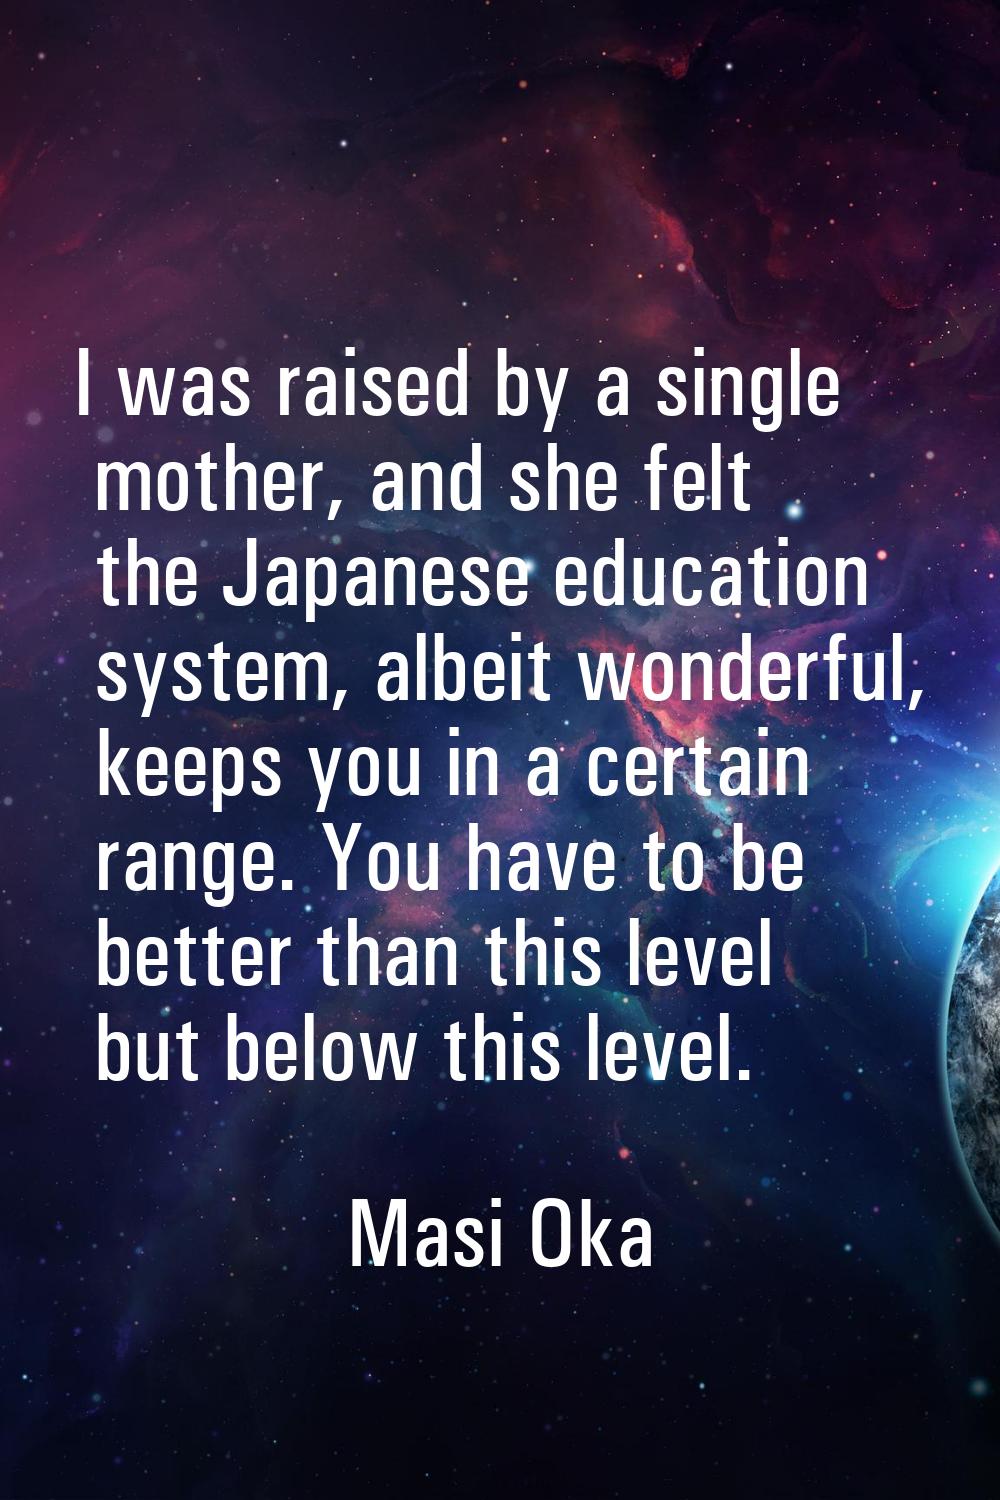 I was raised by a single mother, and she felt the Japanese education system, albeit wonderful, keep